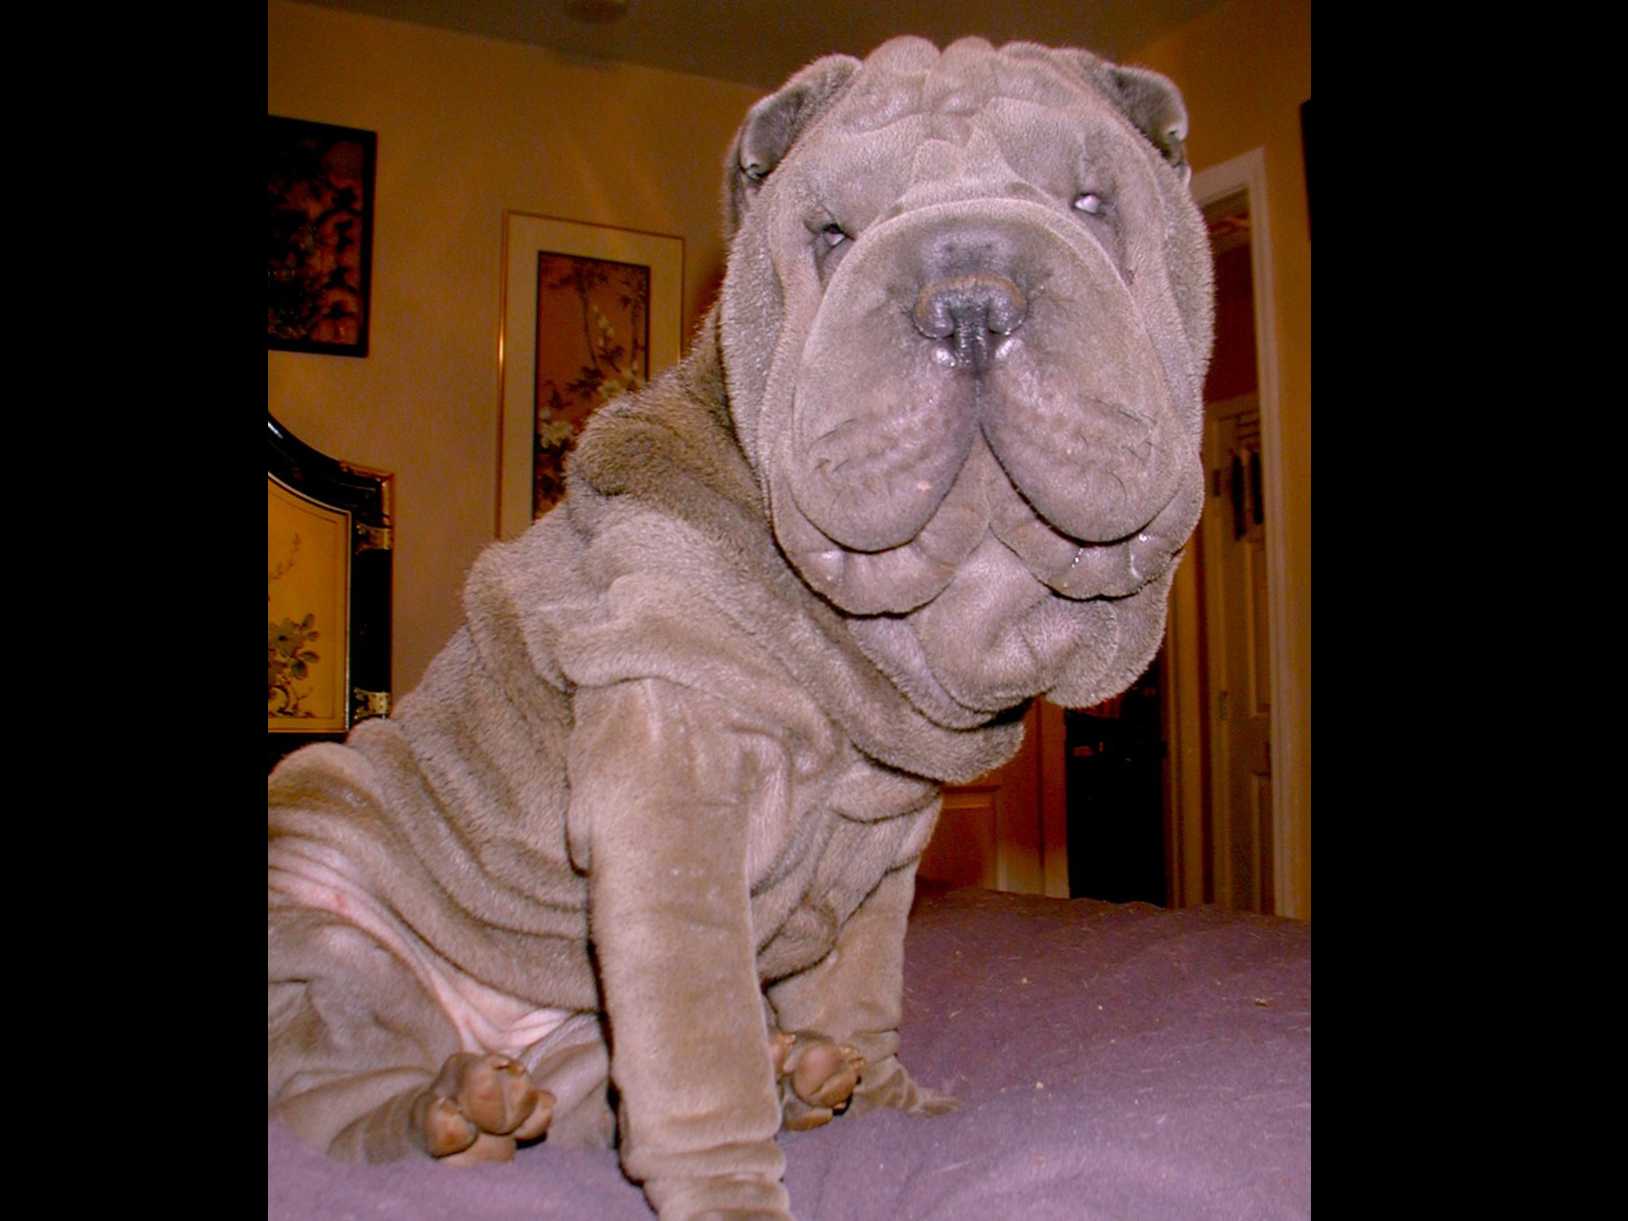 Nice Images Collection: Shar Pei Desktop Wallpapers